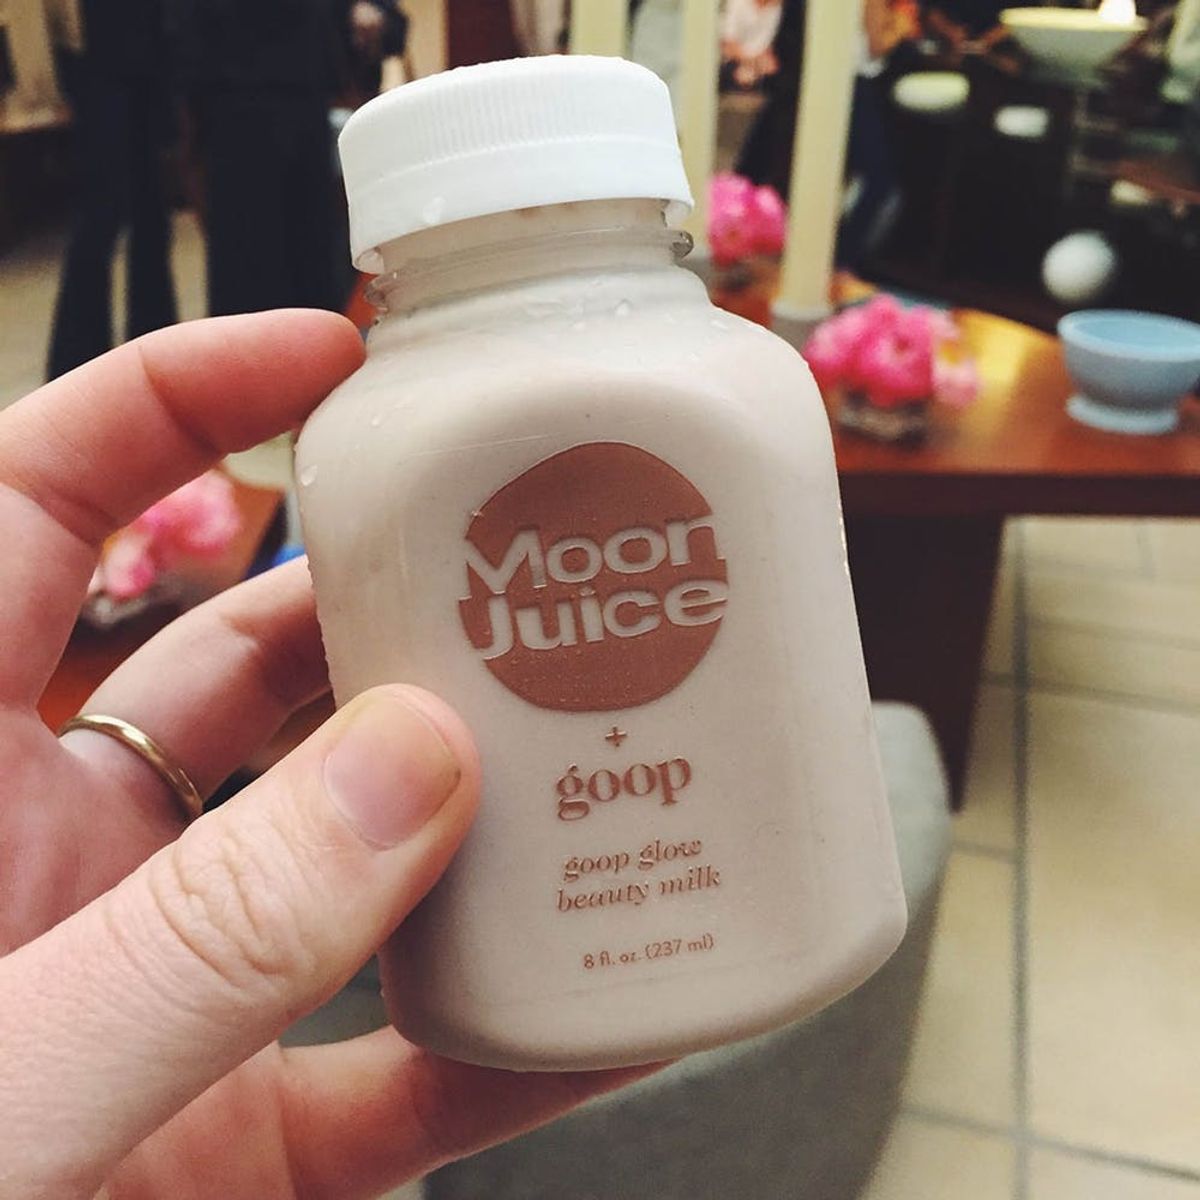 We Tried Goop’s Beauty Milk and It Was NOT What You Think